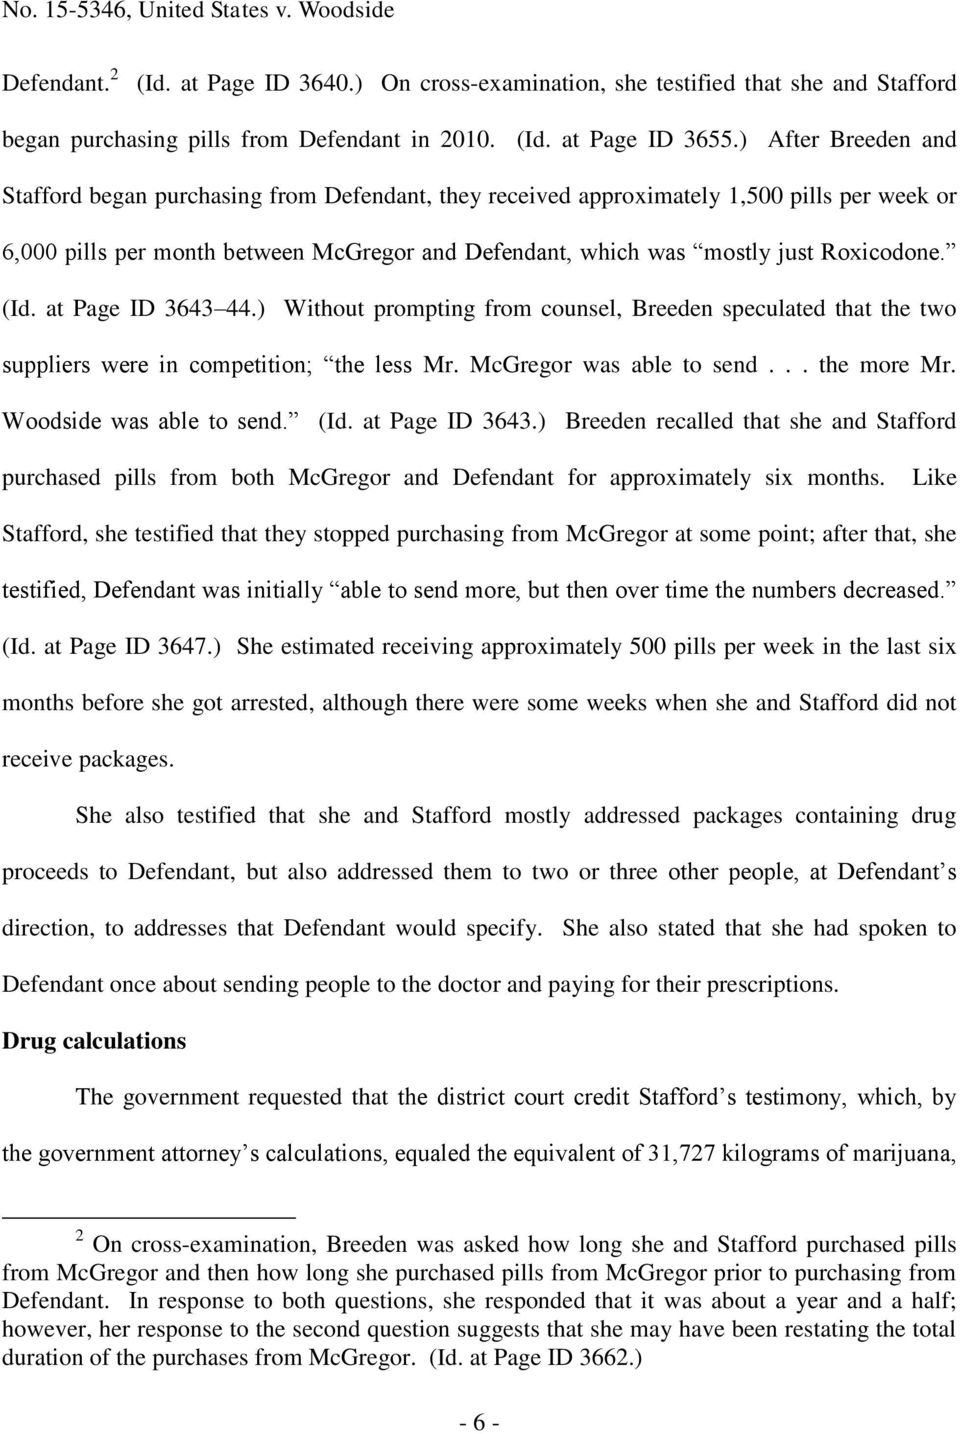 Roxicodone. (Id. at Page ID 3643 44.) Without prompting from counsel, Breeden speculated that the two suppliers were in competition; the less Mr. McGregor was able to send... the more Mr.